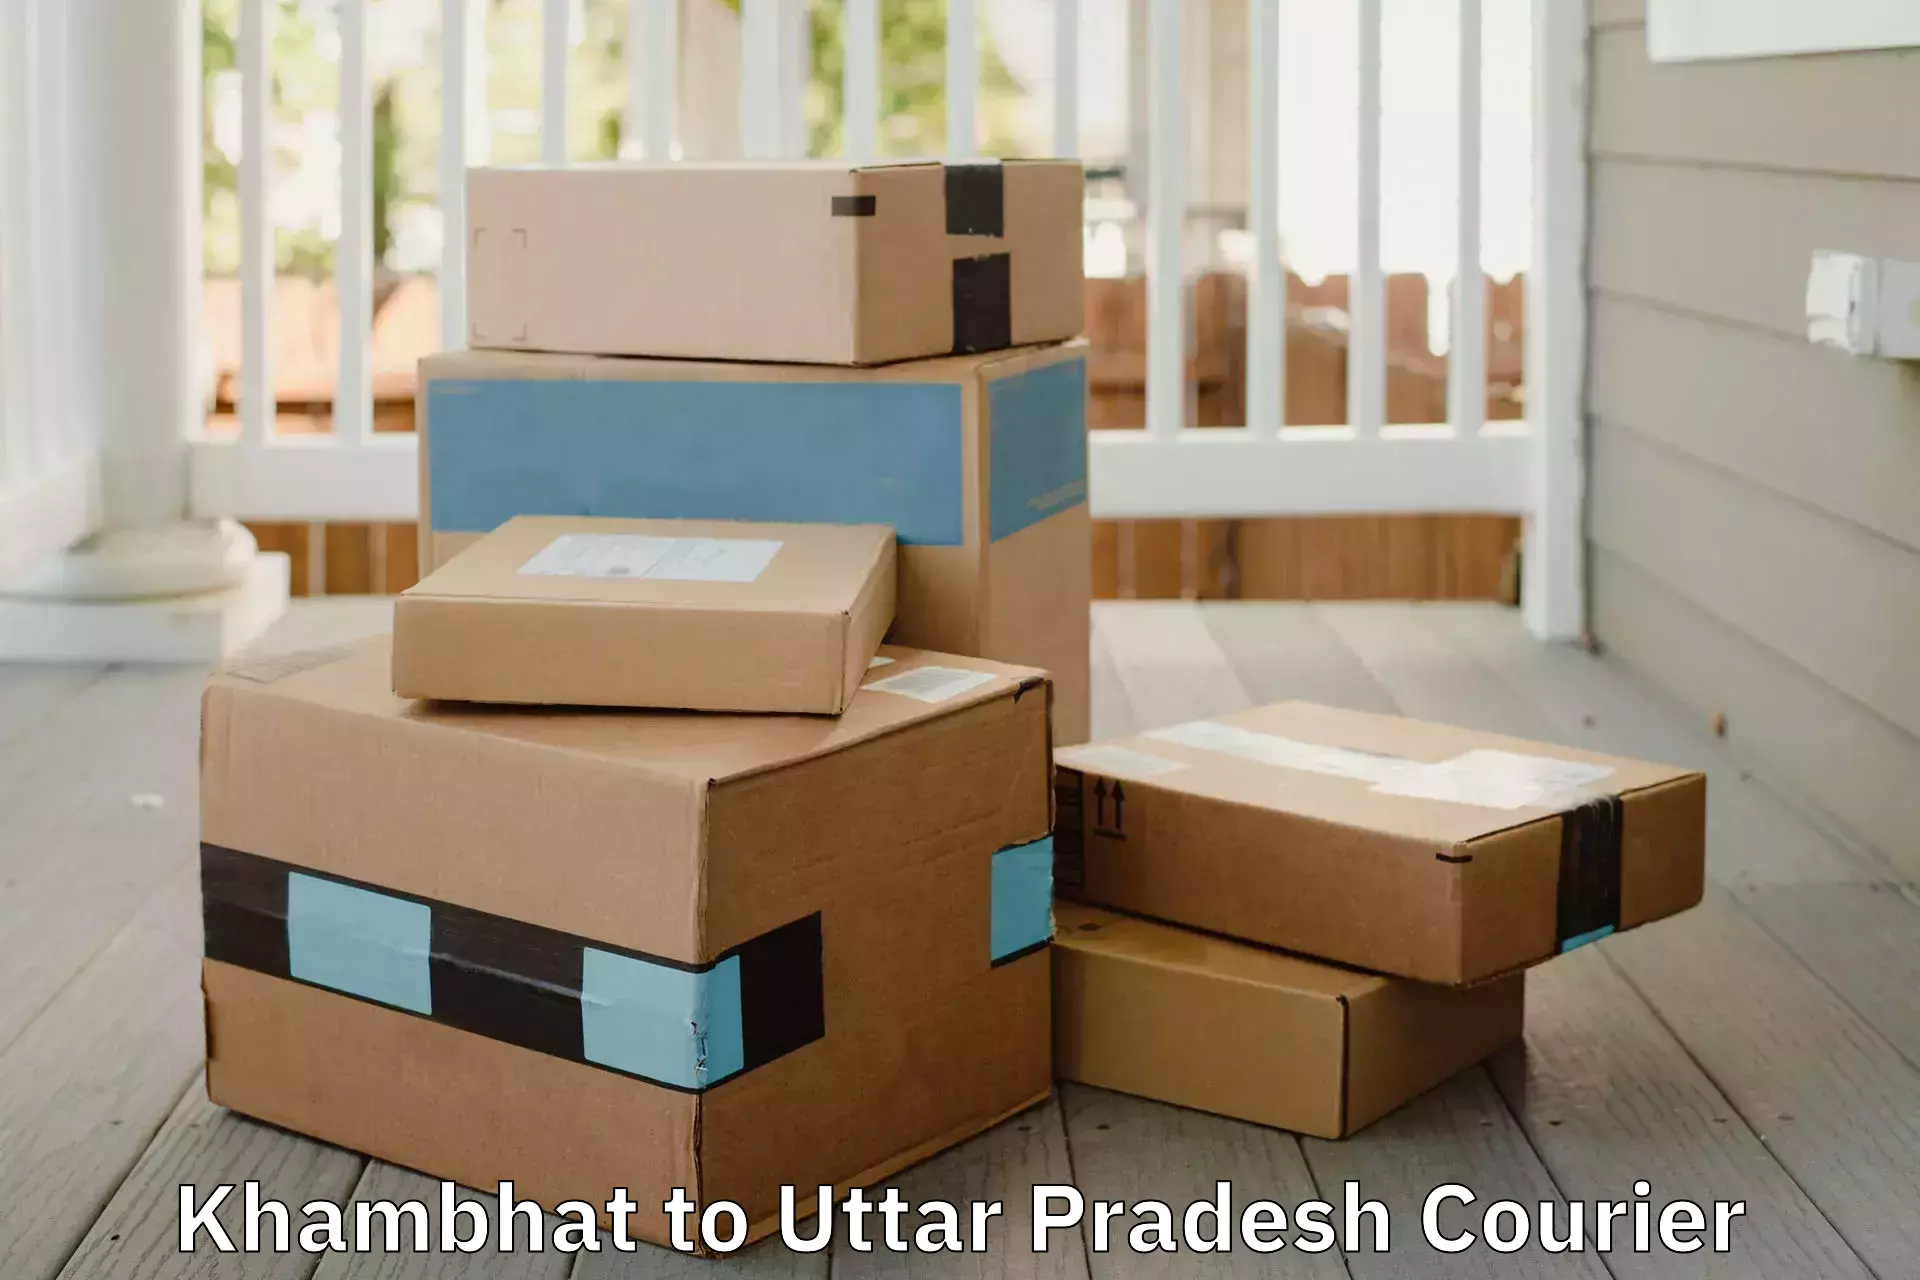 Cost-effective moving options in Khambhat to Khalilabad